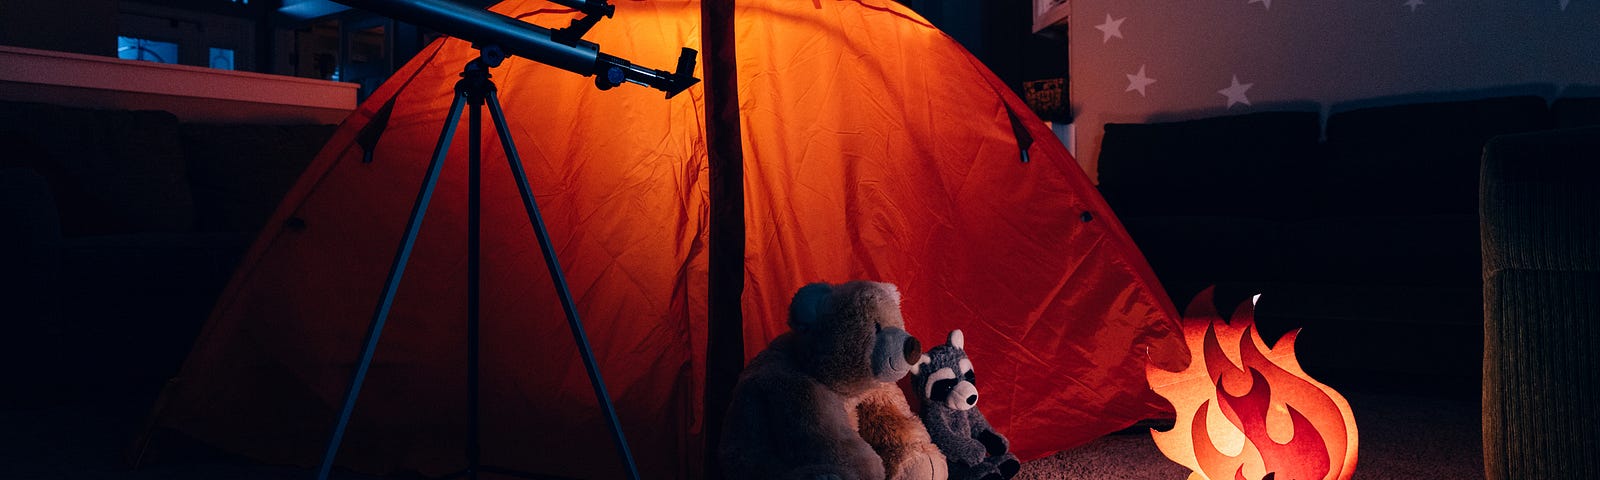 Tent and fake campfire set up indoors with stuffed animals huddled around the fire and a telescope.